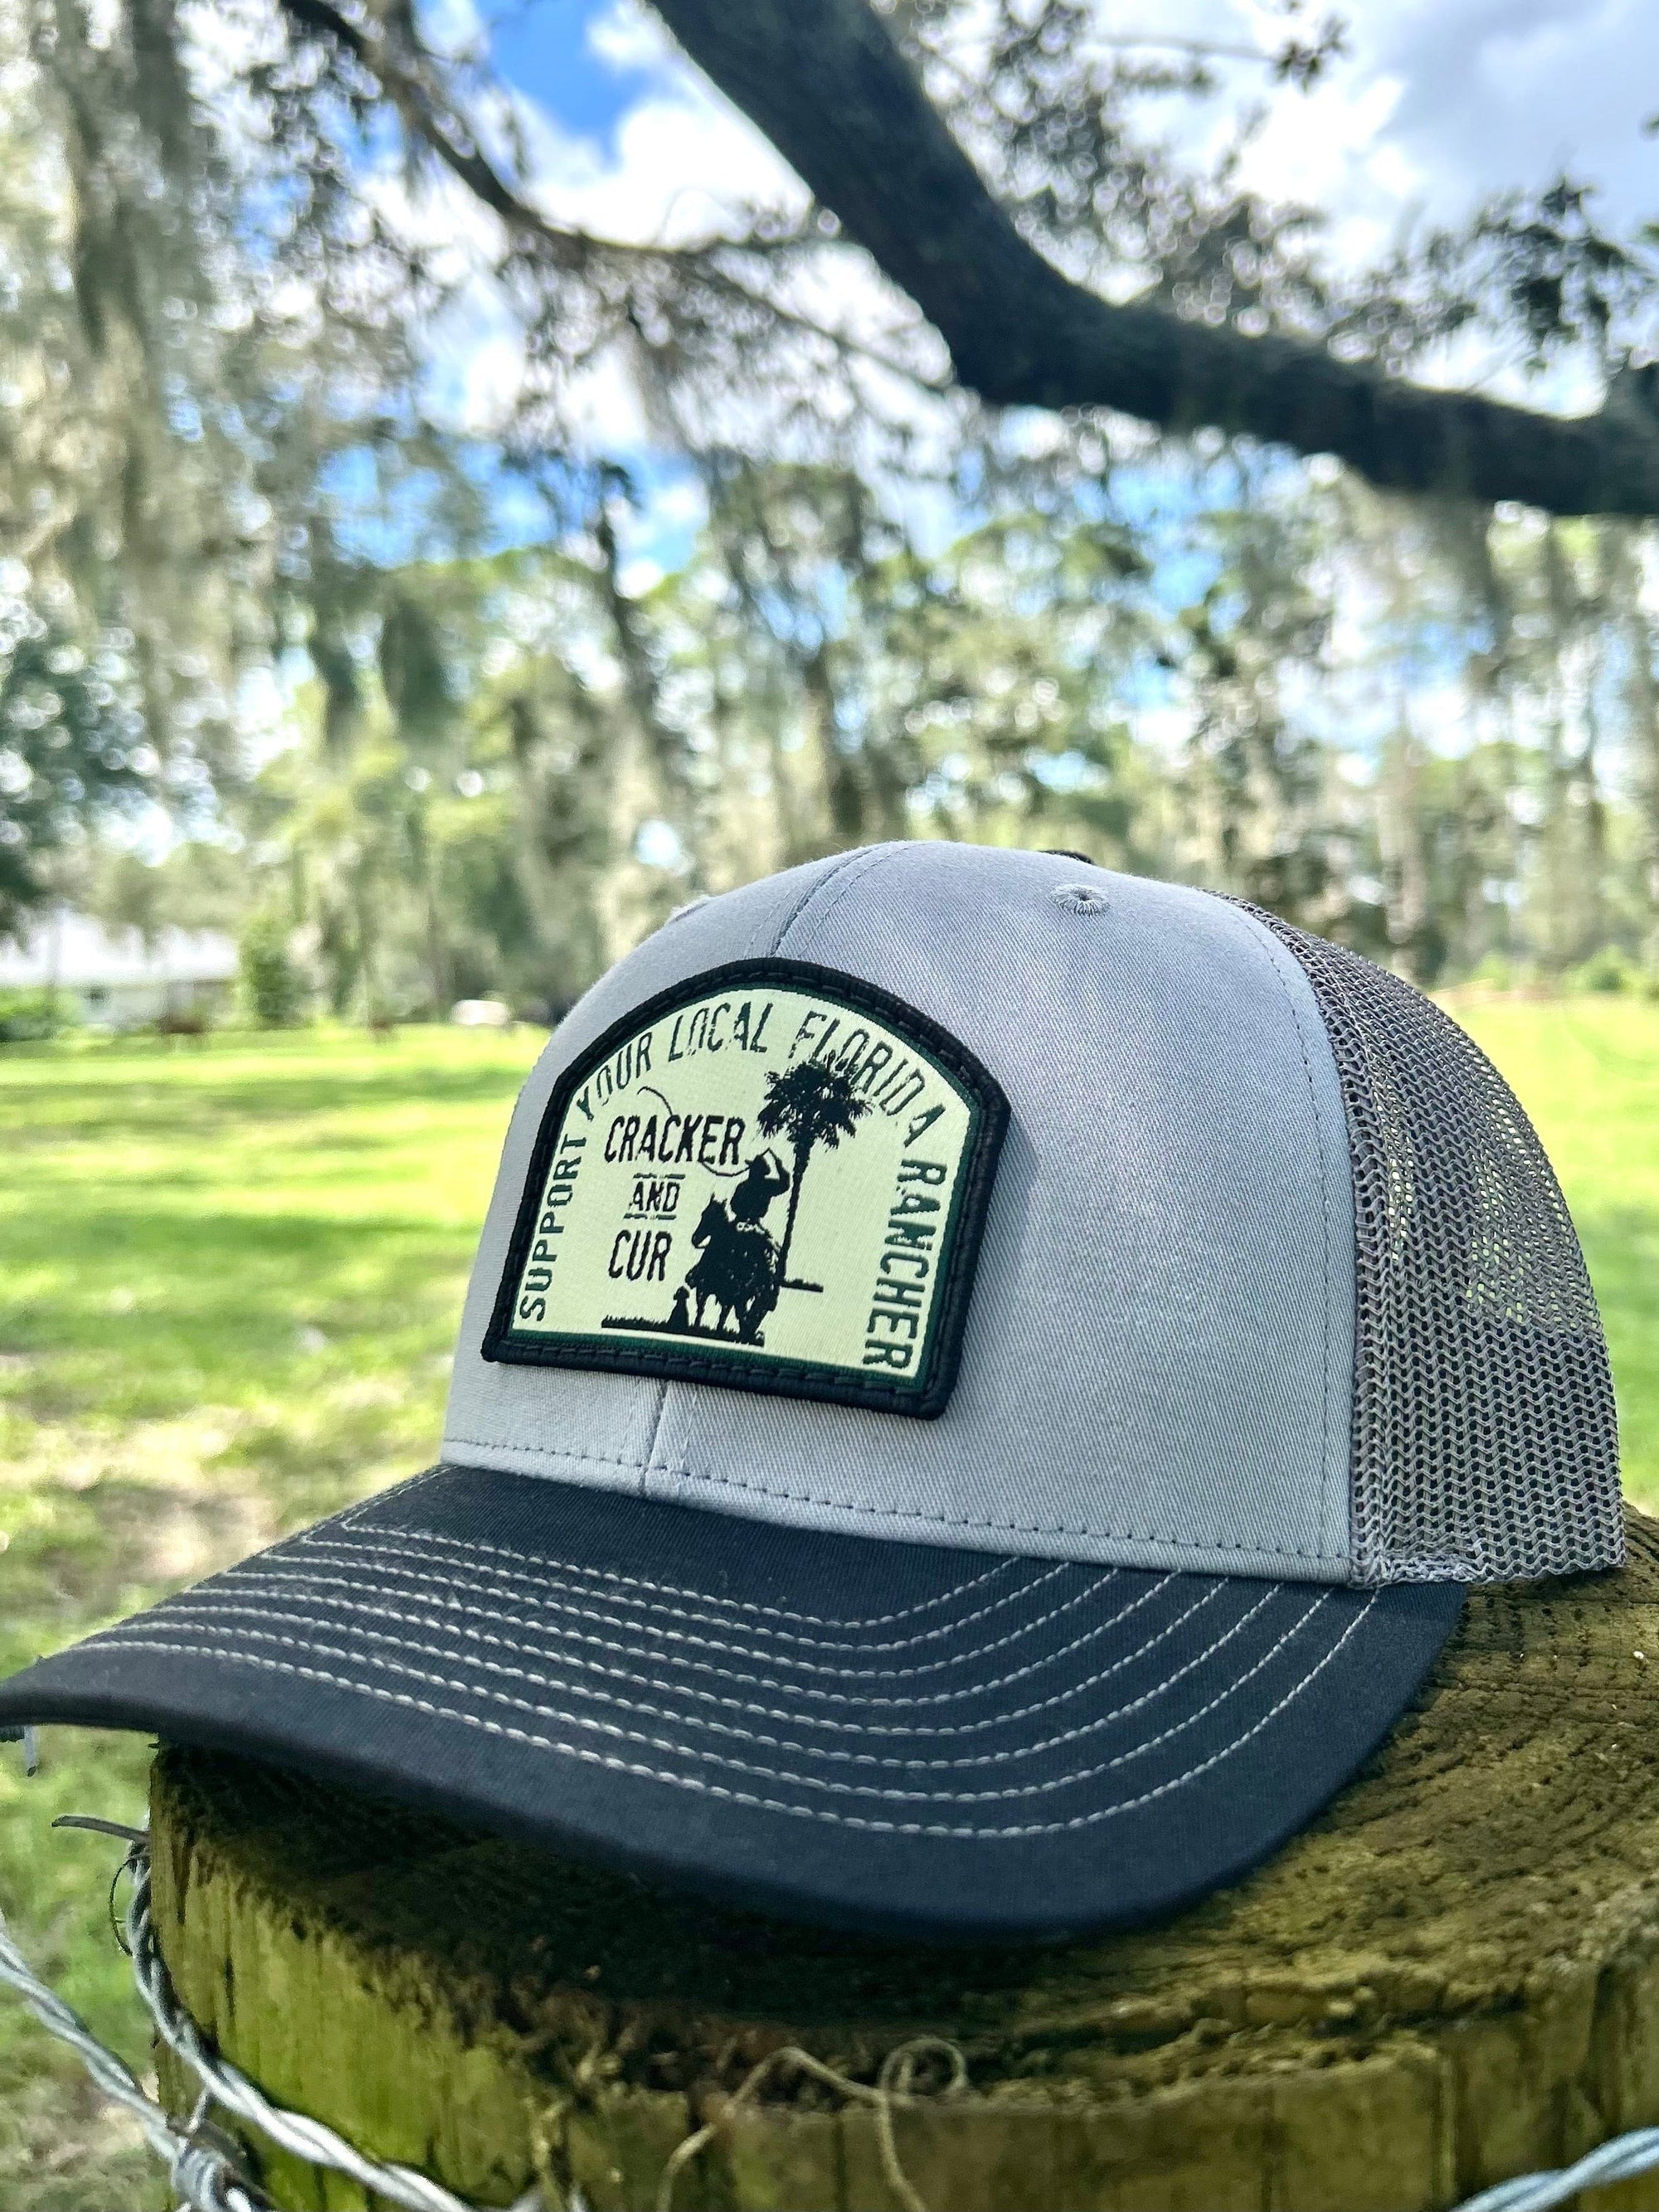 Cracker and Cur Hats Local Florida Patch Hat - Grey/Charcoal/Black